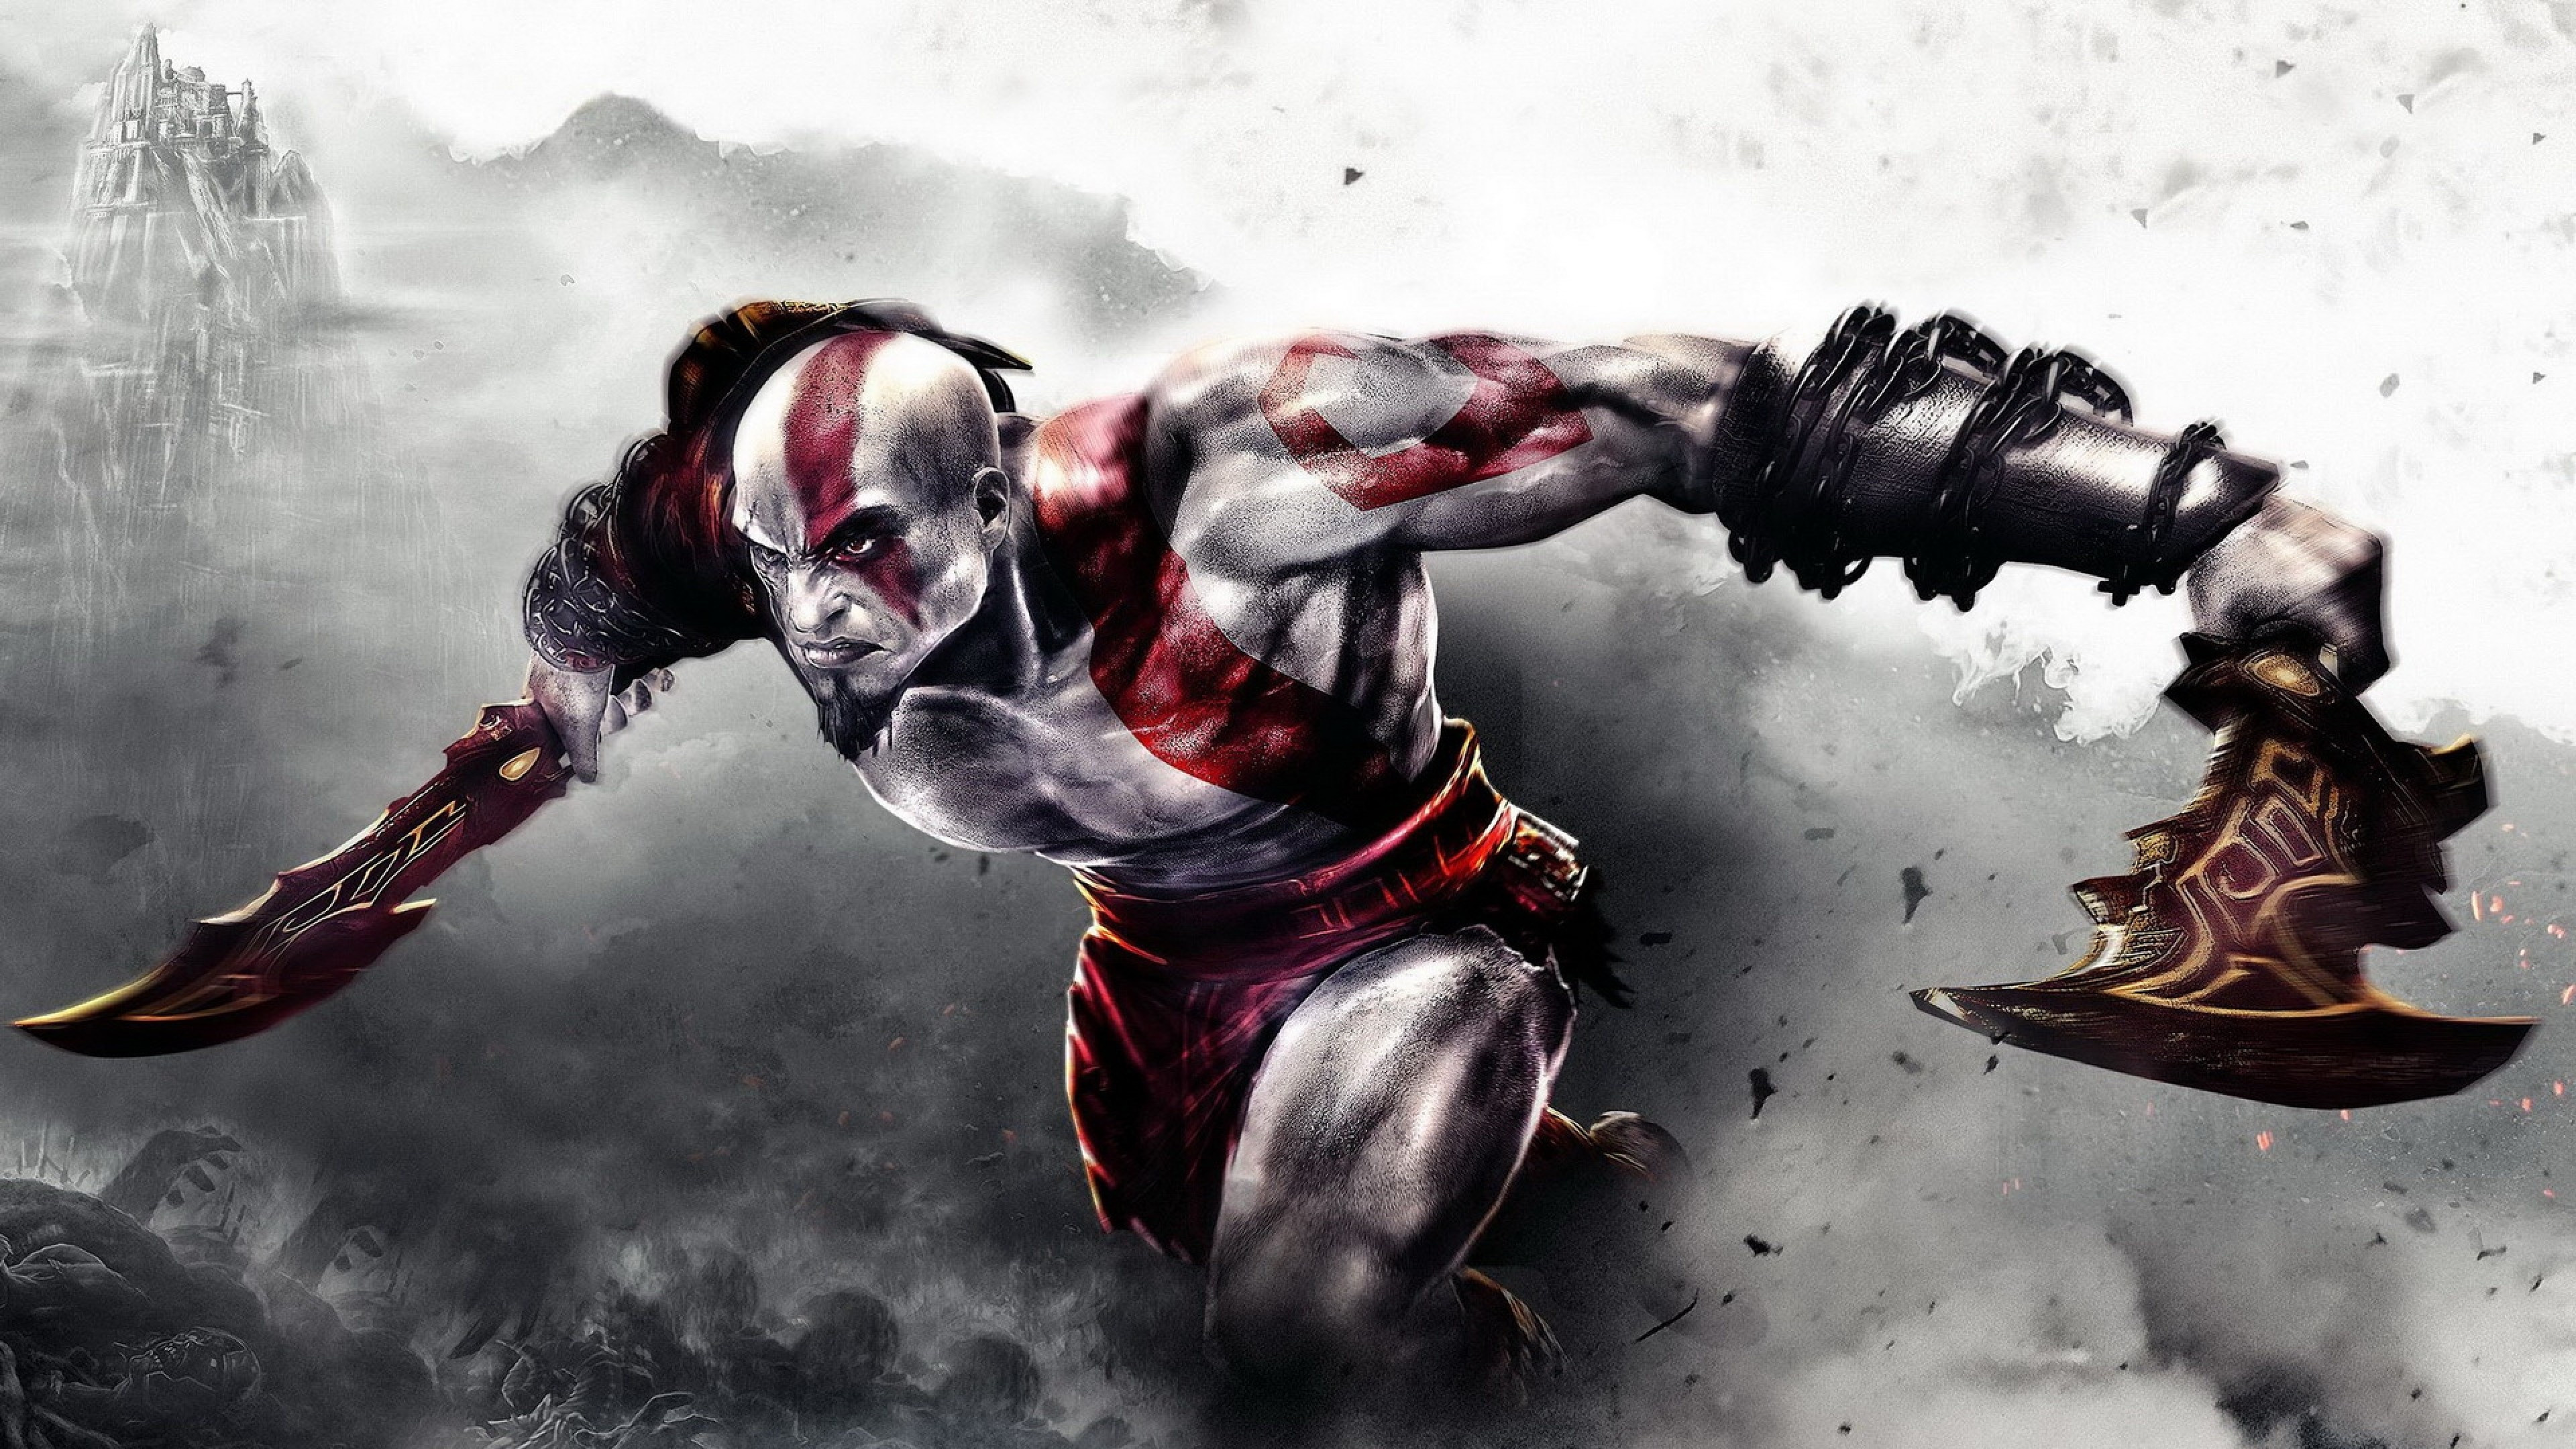 Kratos's blades, Iconic weapons, Power of the gods, Unleashed fury, 3840x2160 4K Desktop